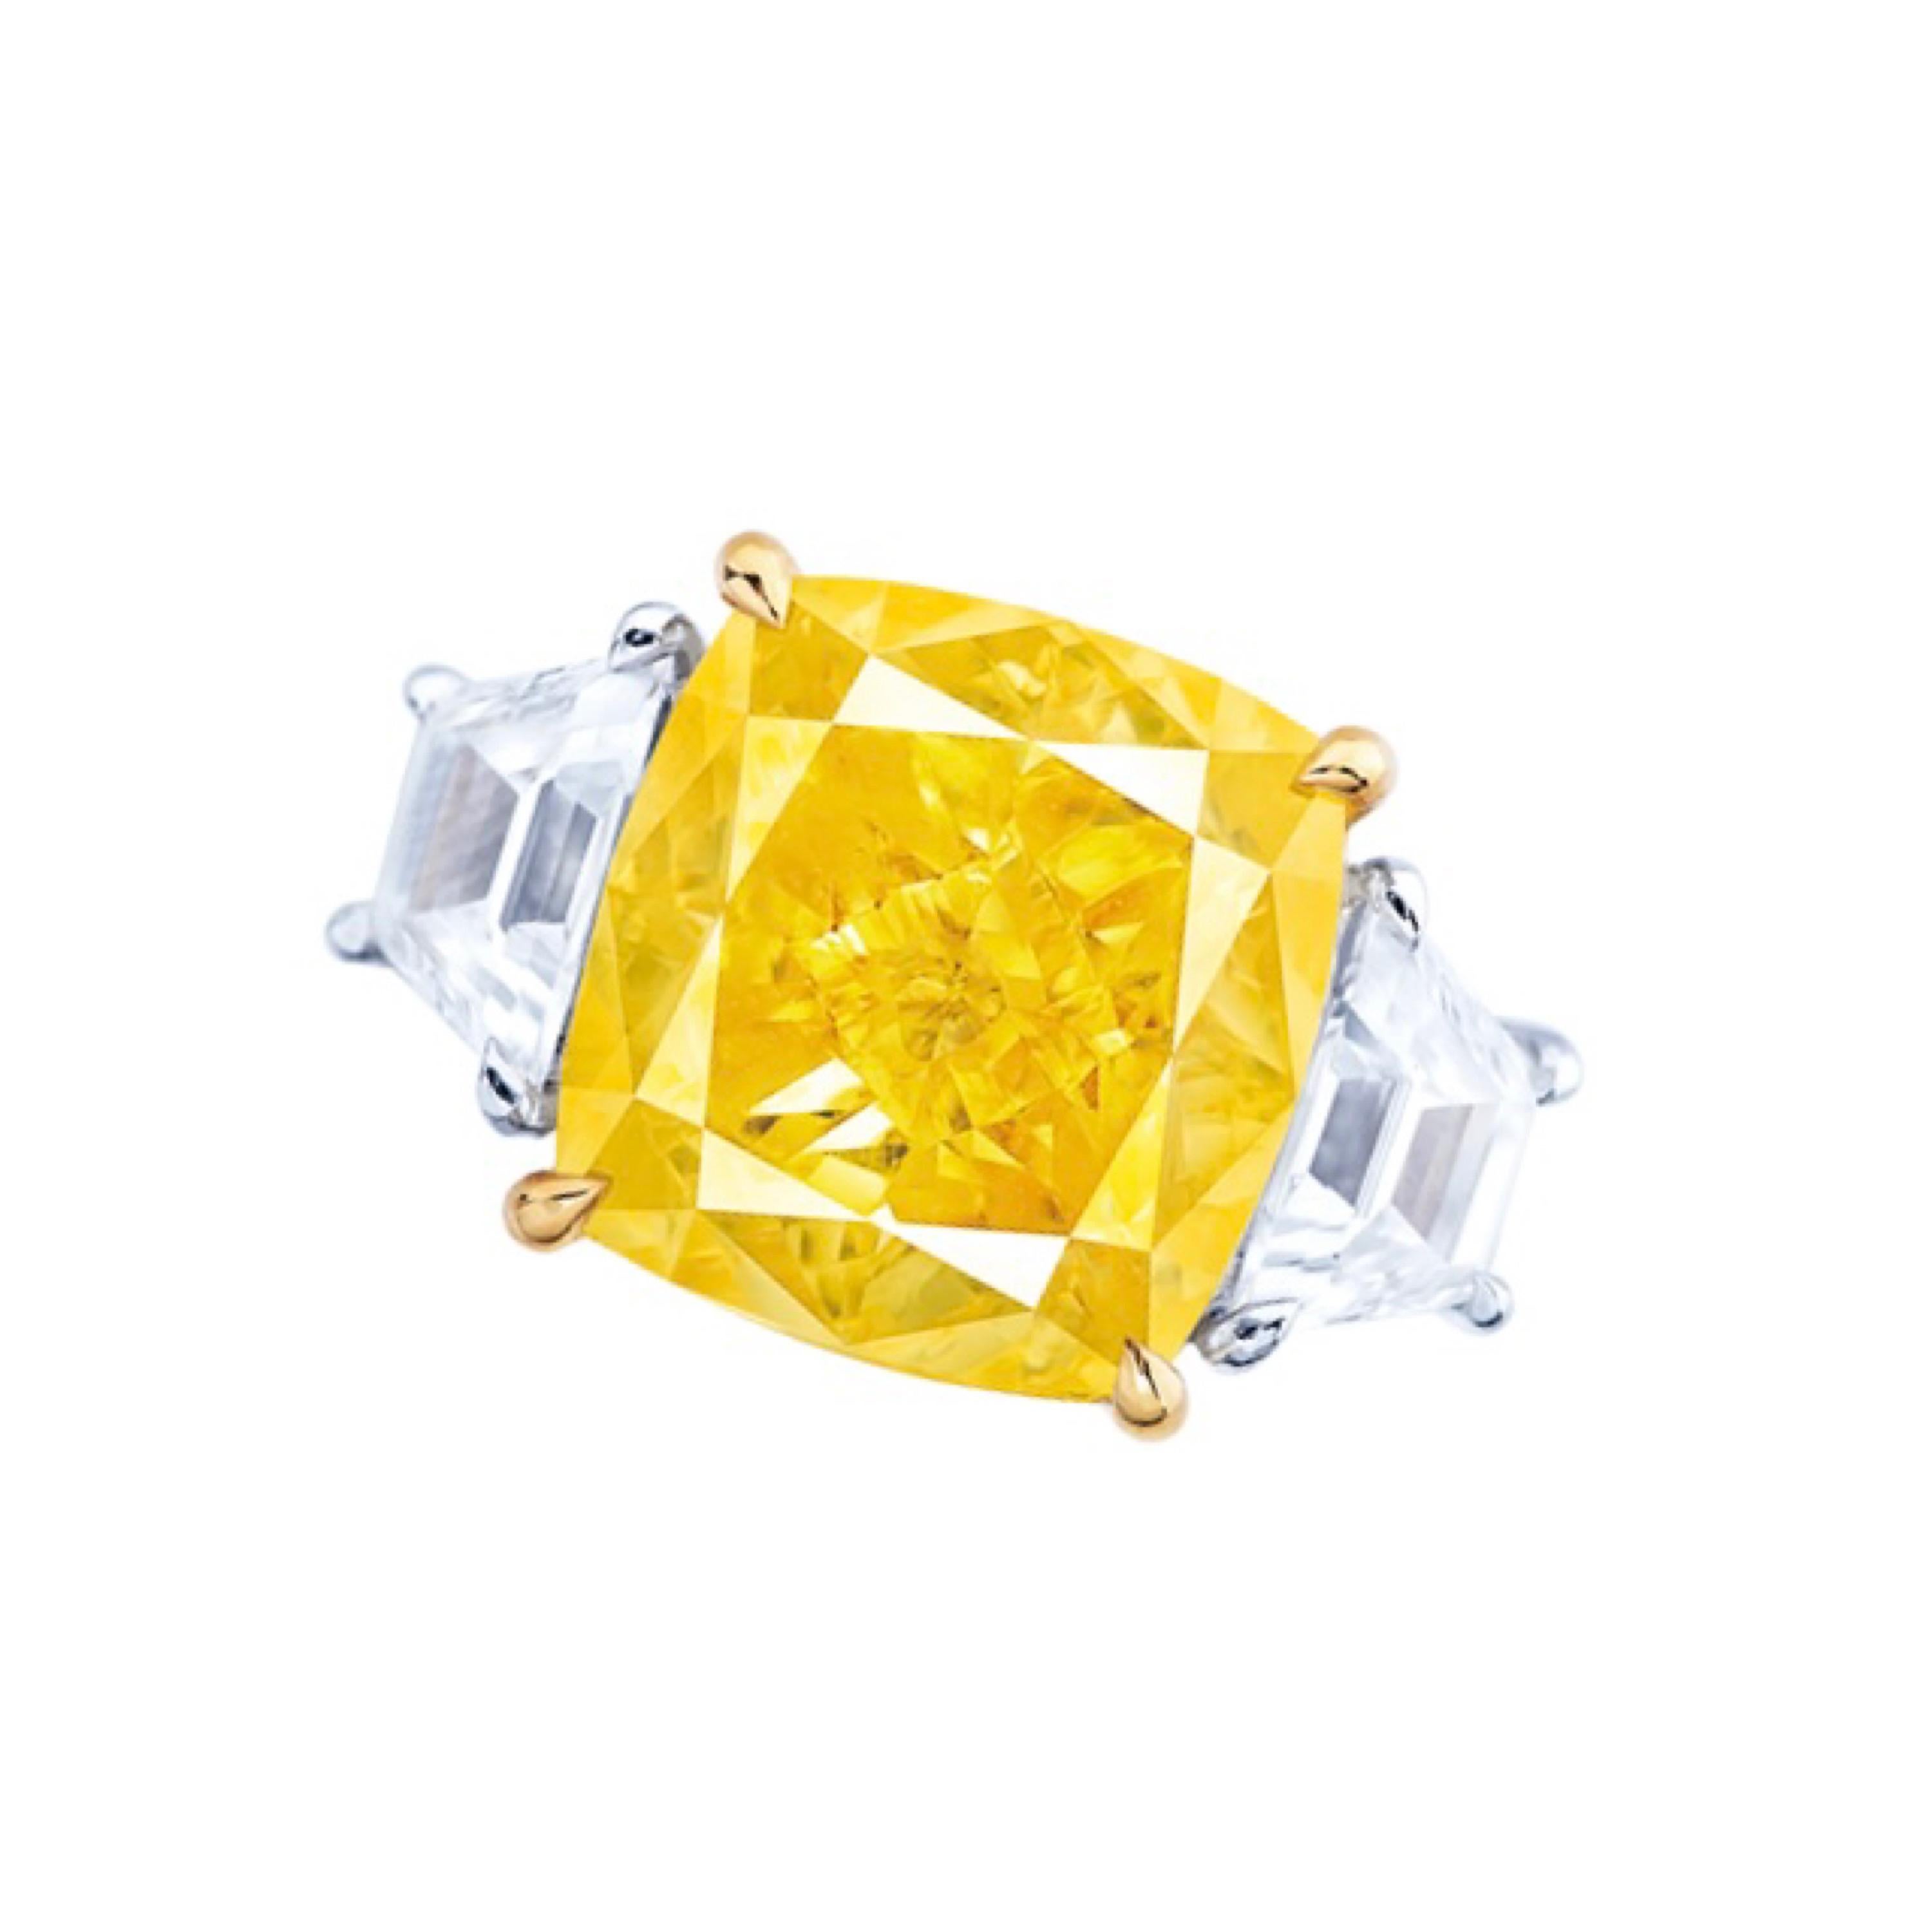 Main stone: 10.02 carats
Color: Fancy Intense Yellow
Clarity: VS2
Shape: CUSHION
Setting: 2 white diamonds totaling approximately 1.36 carats
Material: 18K
From the Emilio Jewelry Vault,  This diamond is one of a kind, because it has no overtone and